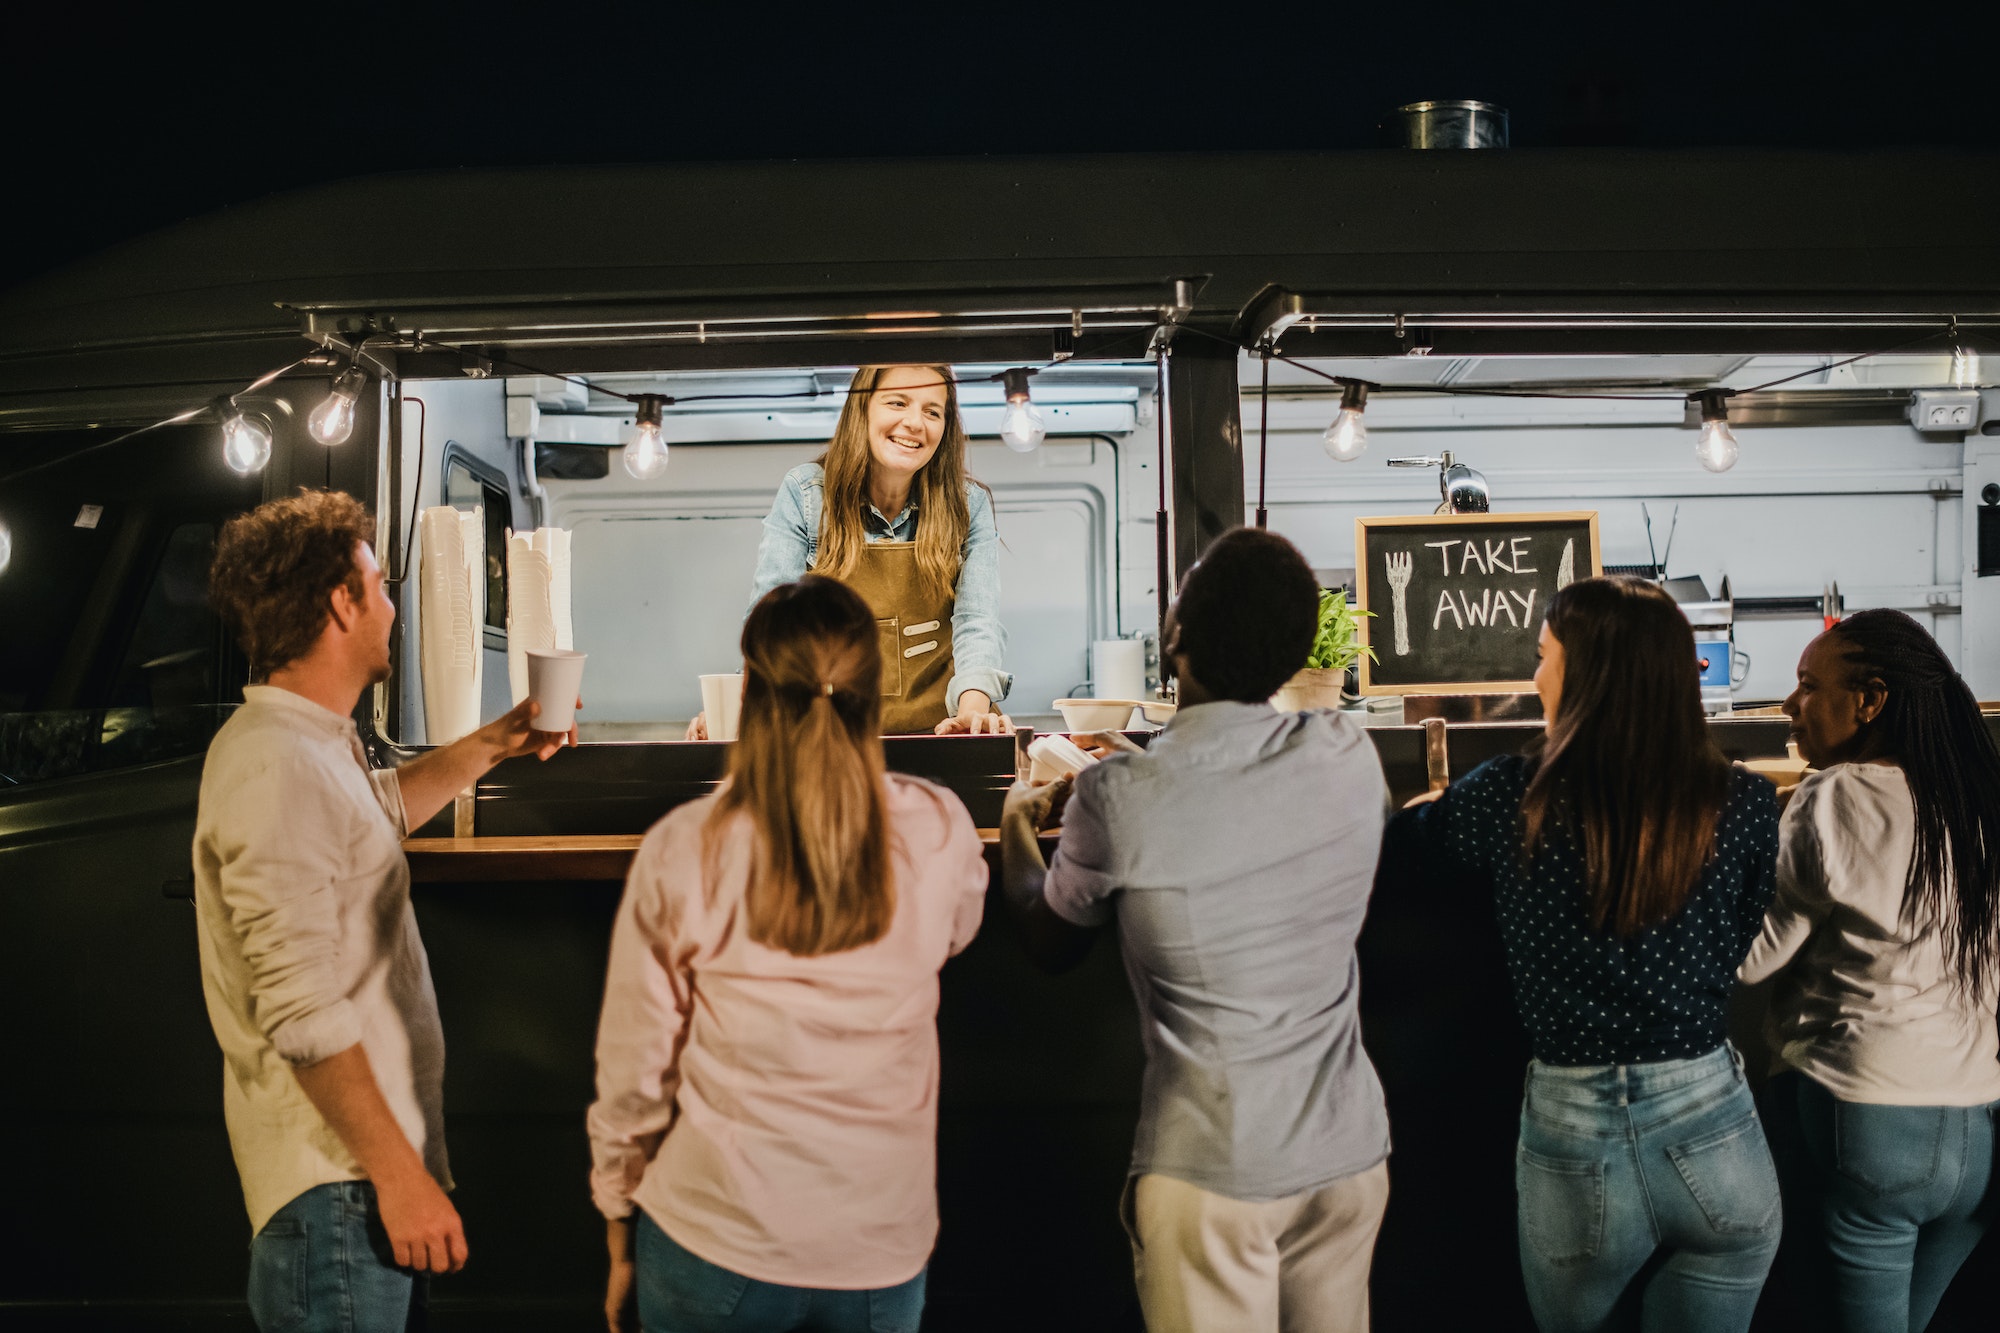 Diverse clients speaking with food truck seller at night